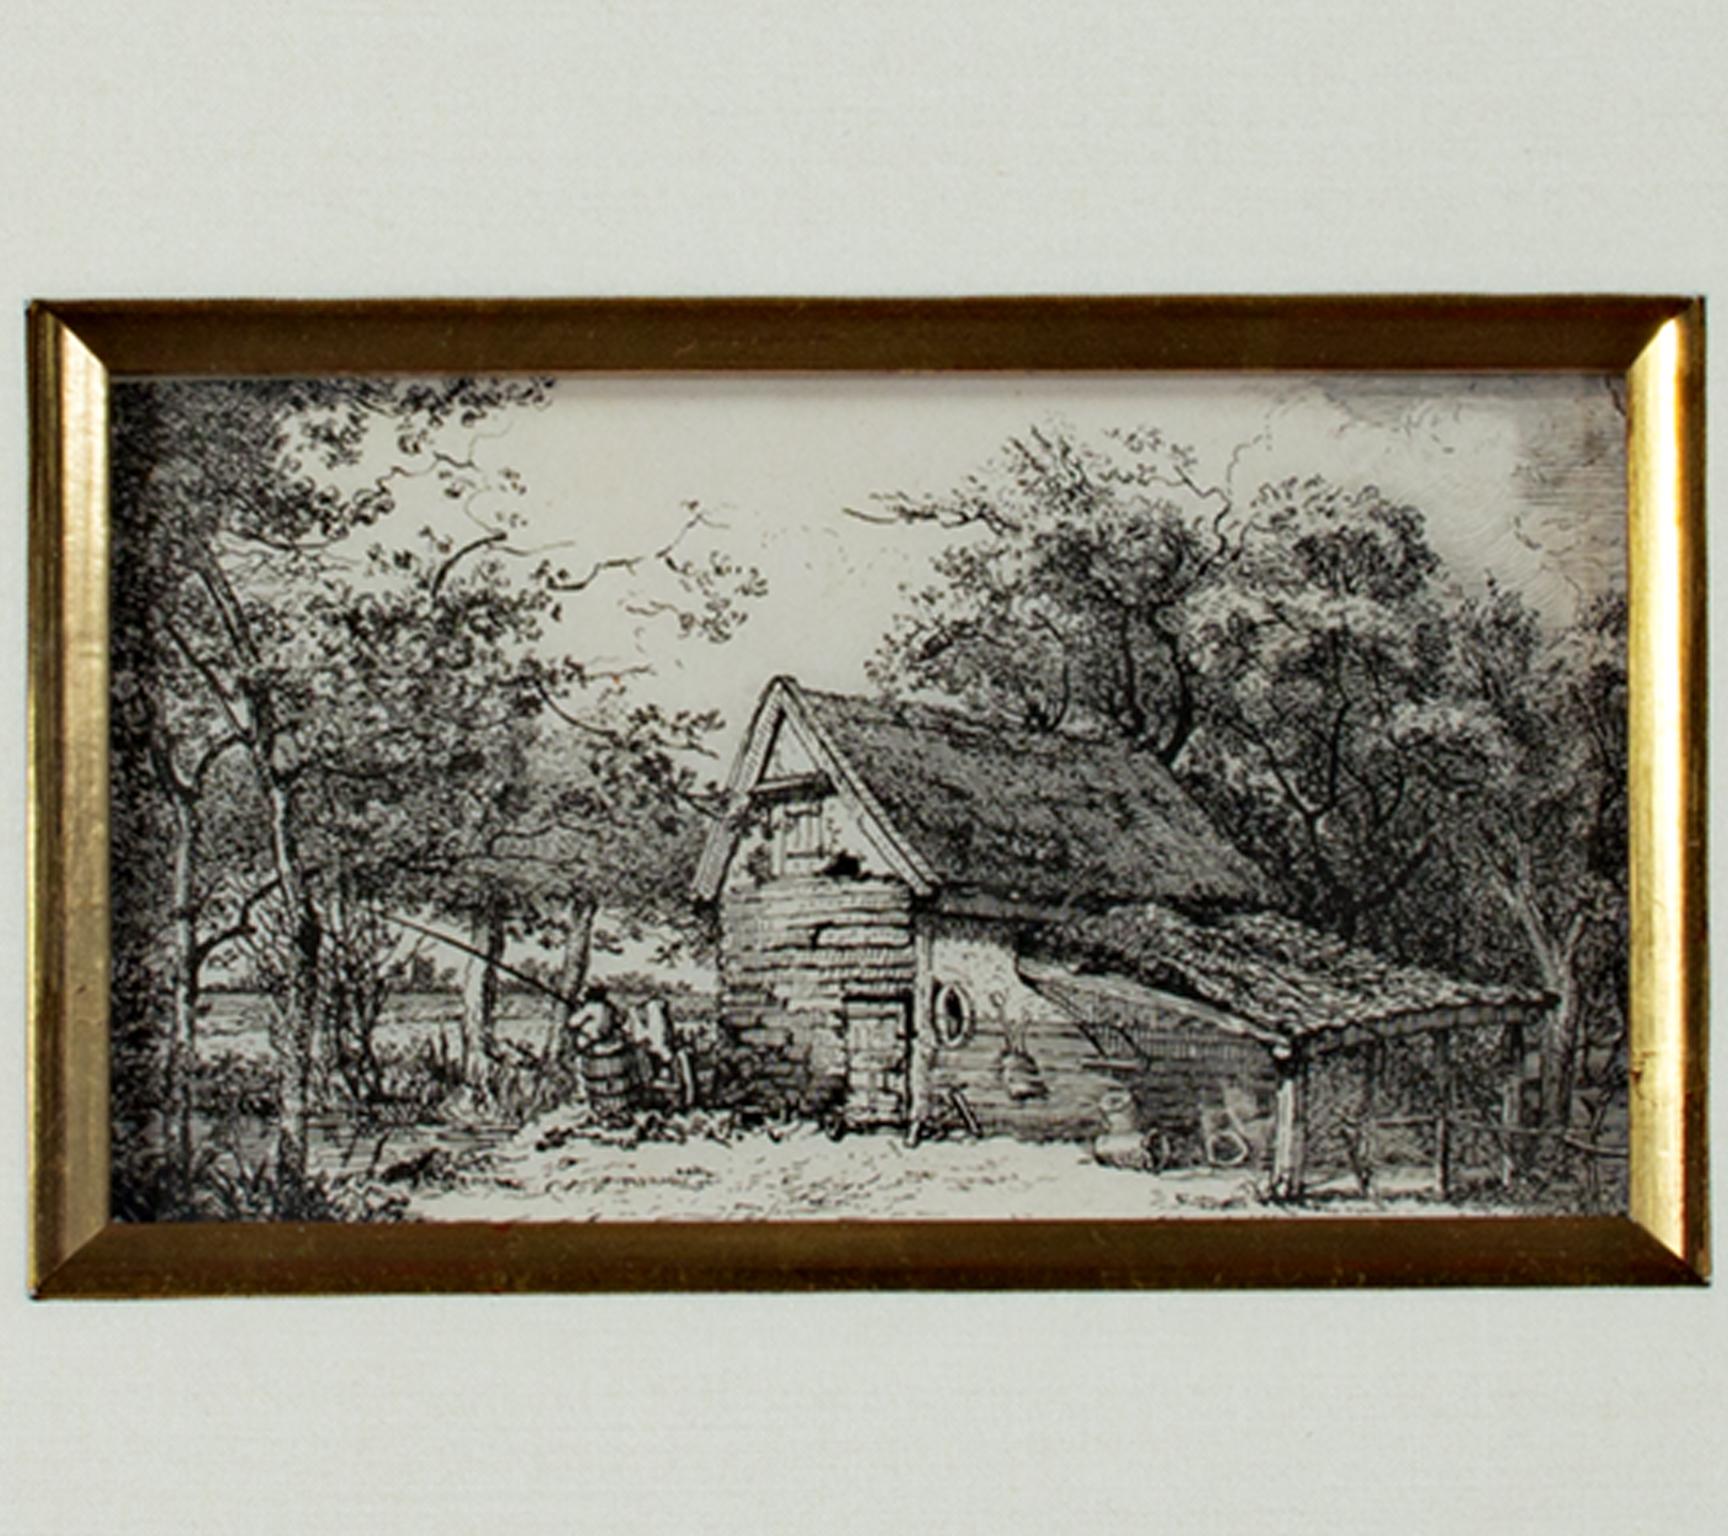 John Thomas Smith Landscape Print - "English Country Fisherman by the Cottage, " Original Etching by J. T. Smith